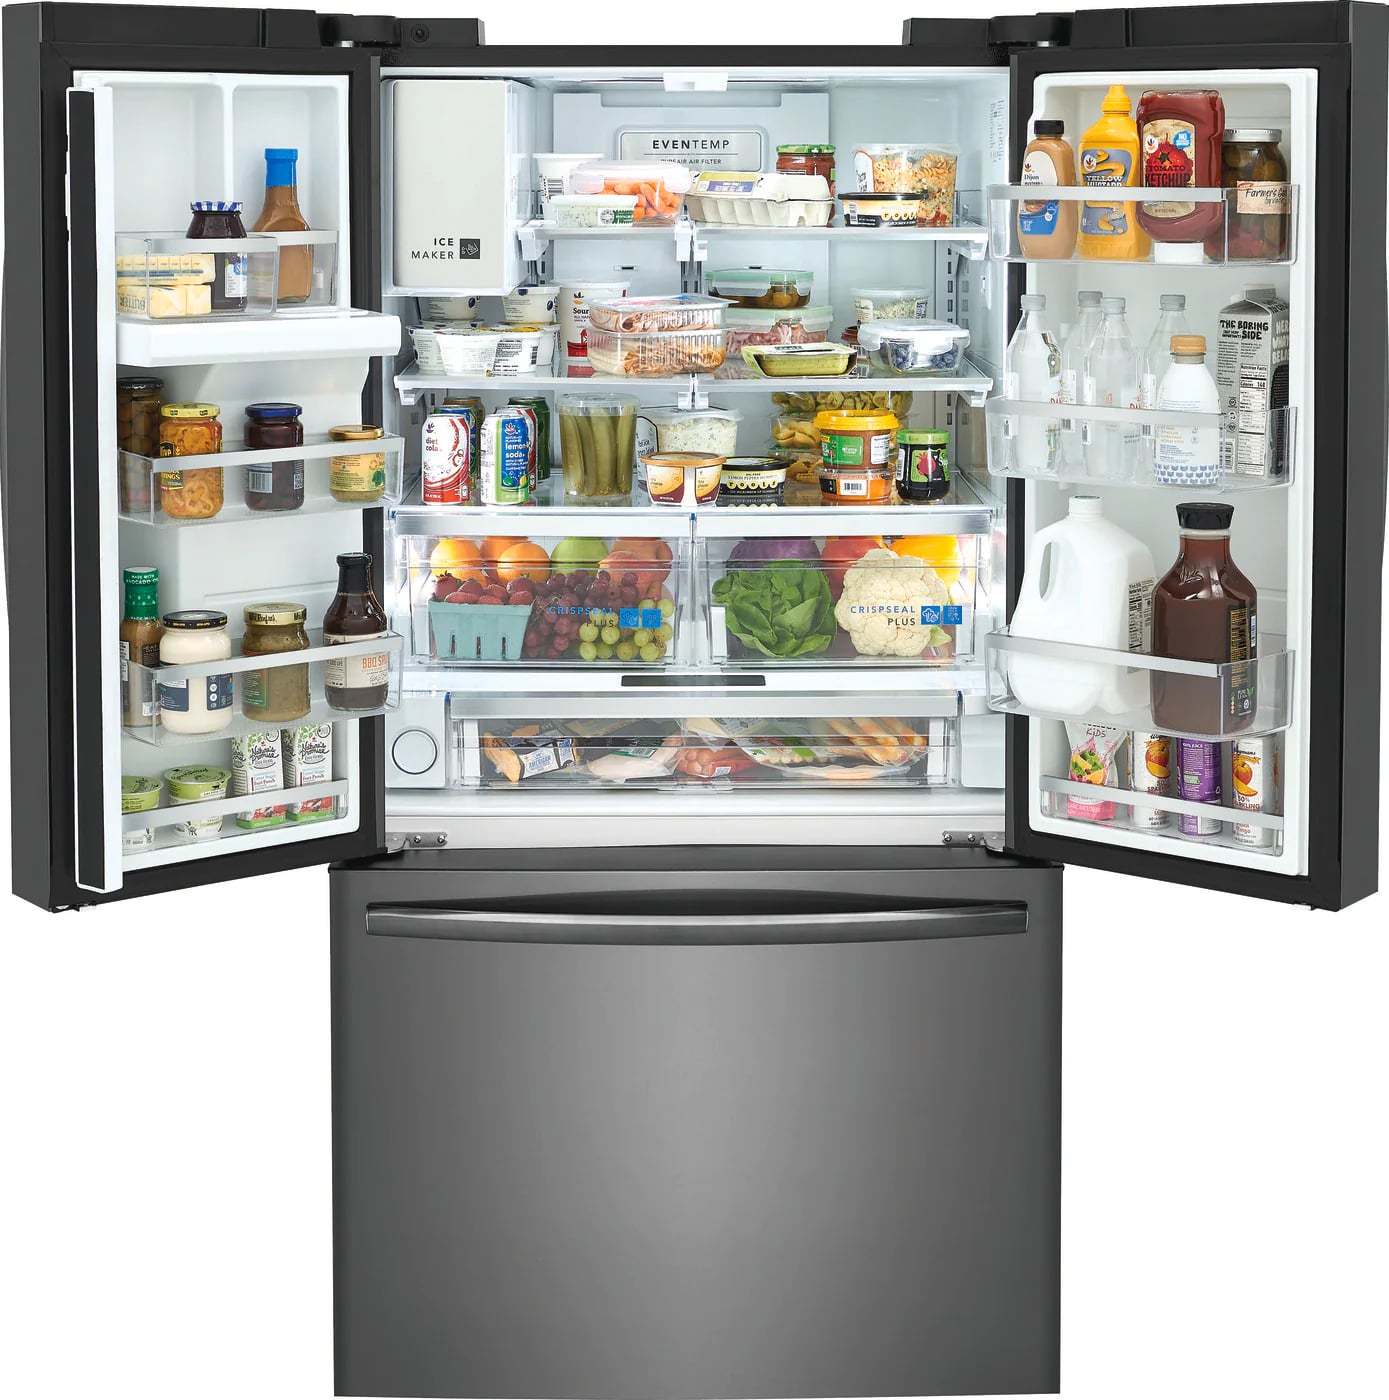 Frigidaire Gallery - 36 Inch 27.8 cu. ft French Door Refrigerator in Black Stainless - GRFS2853AD